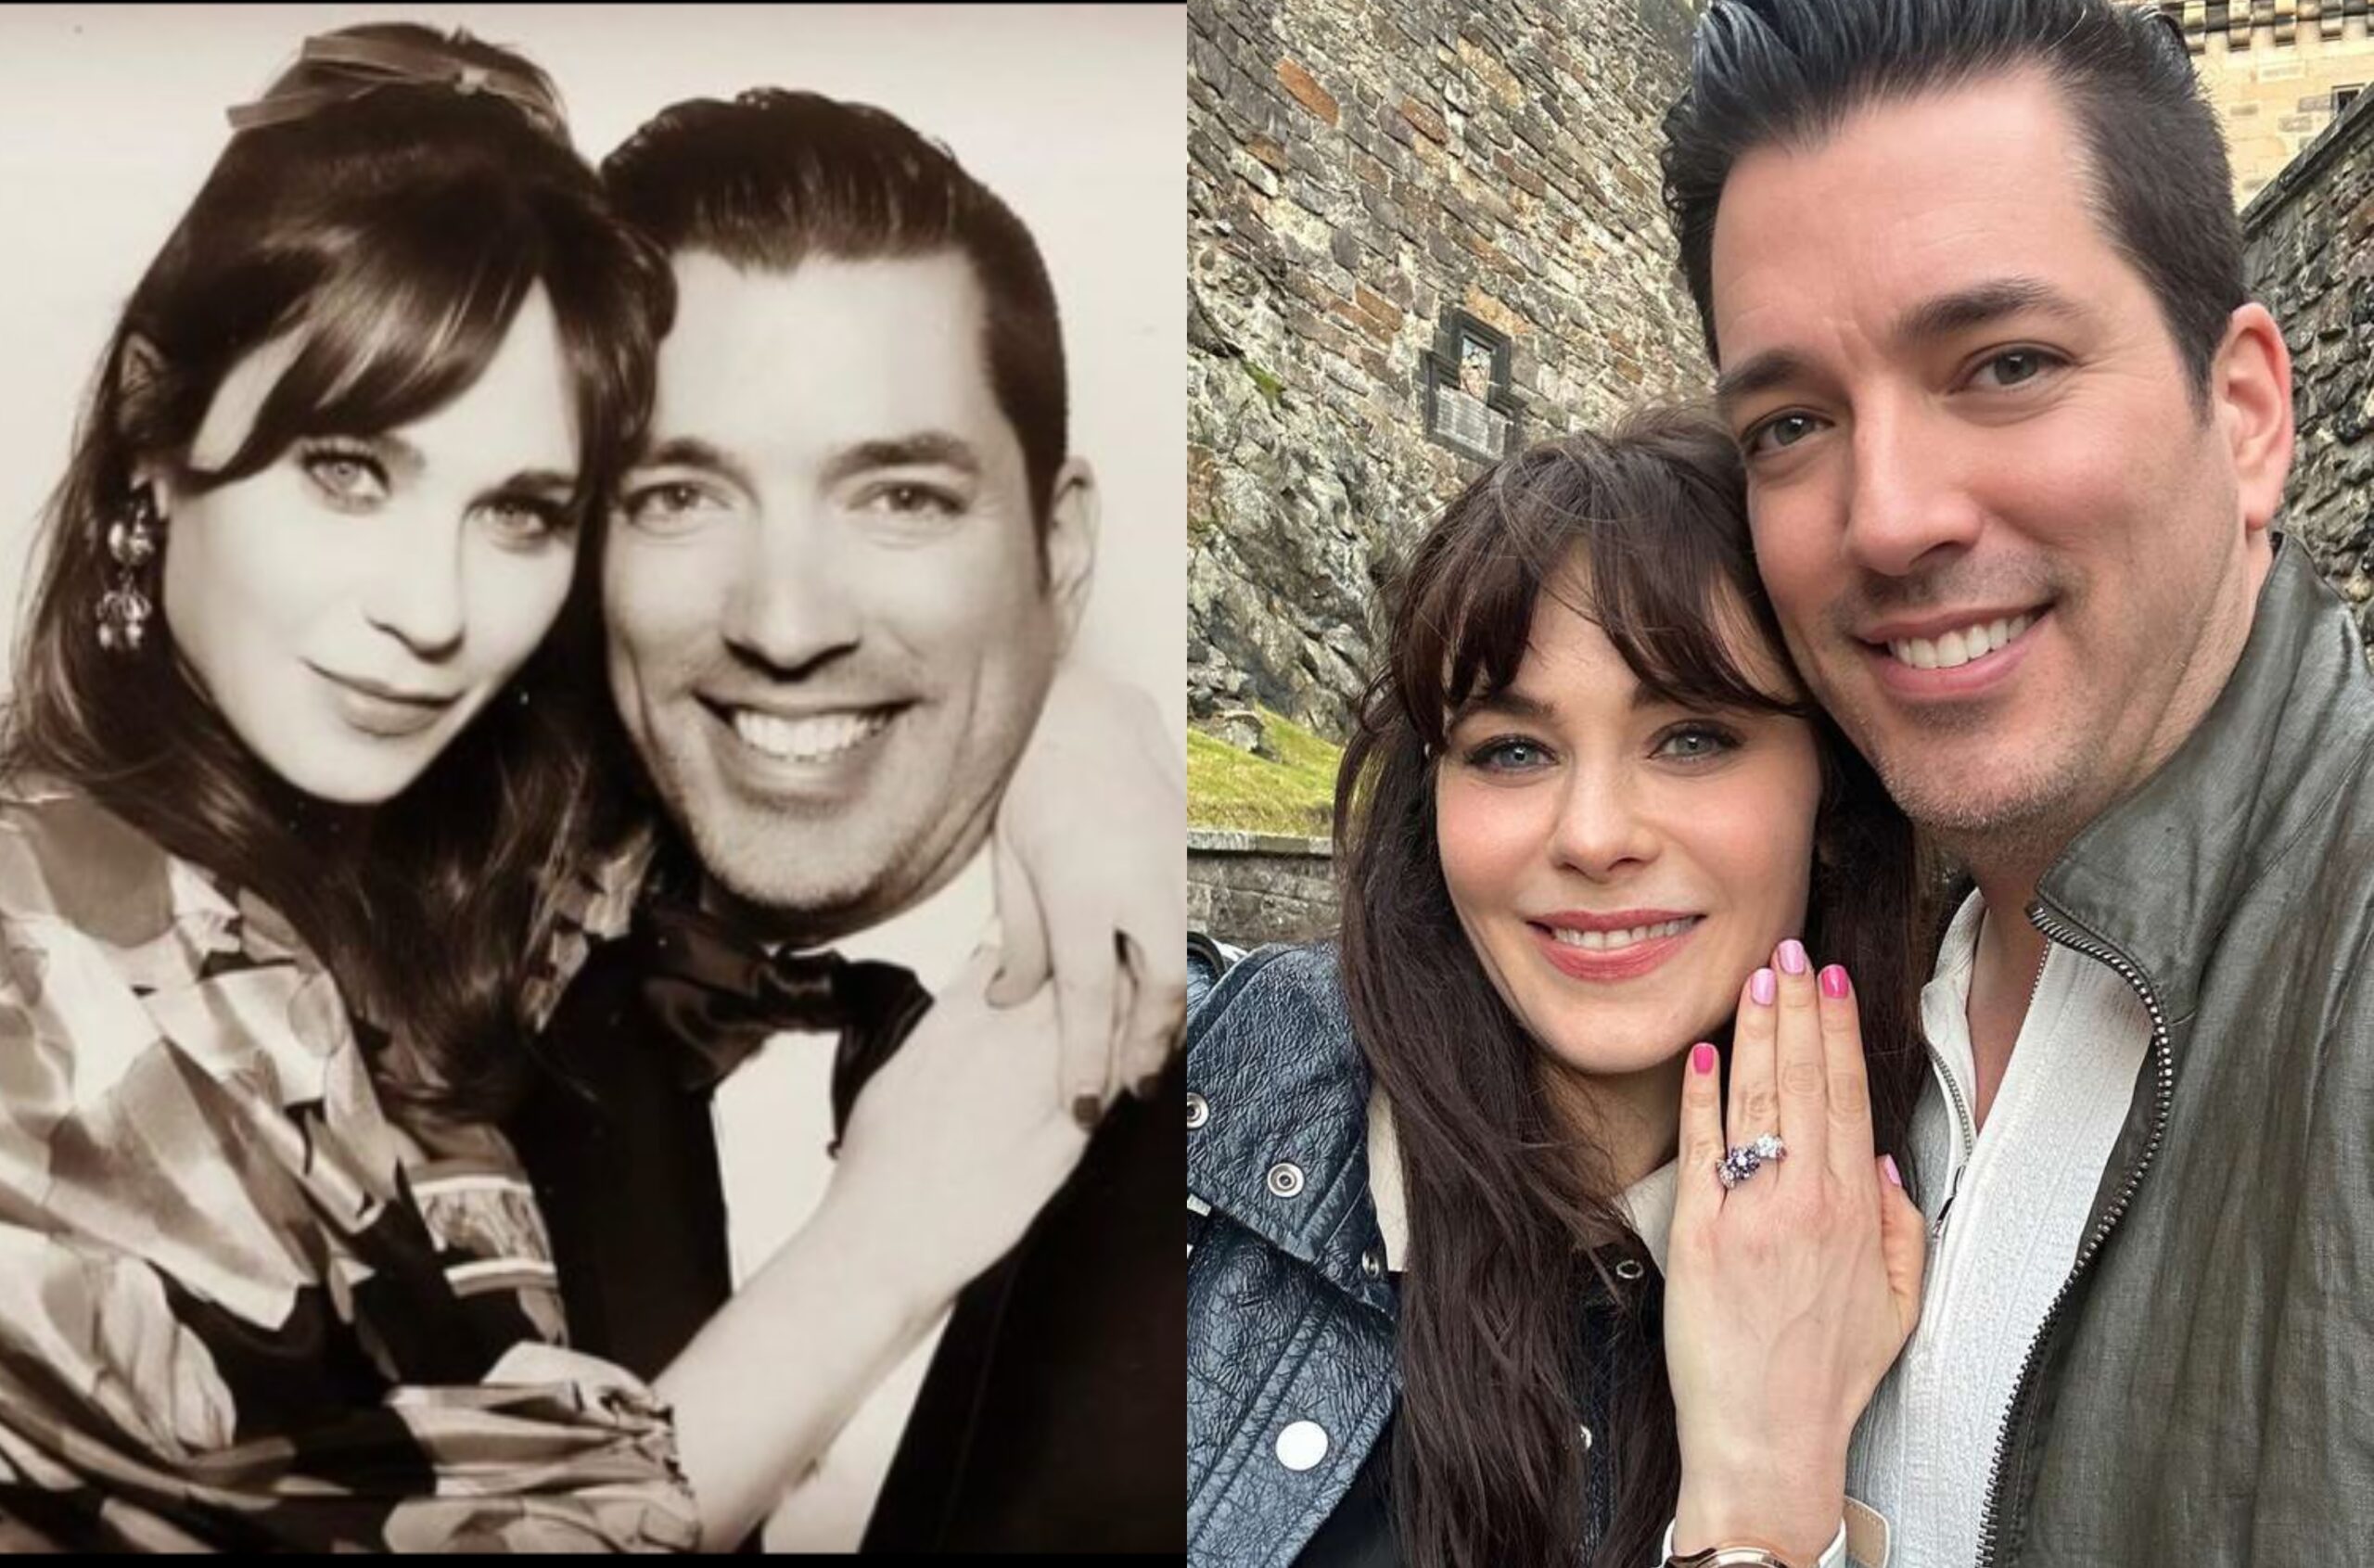 LOOK: Zooey Deschanel and Jonathan Scott are engaged